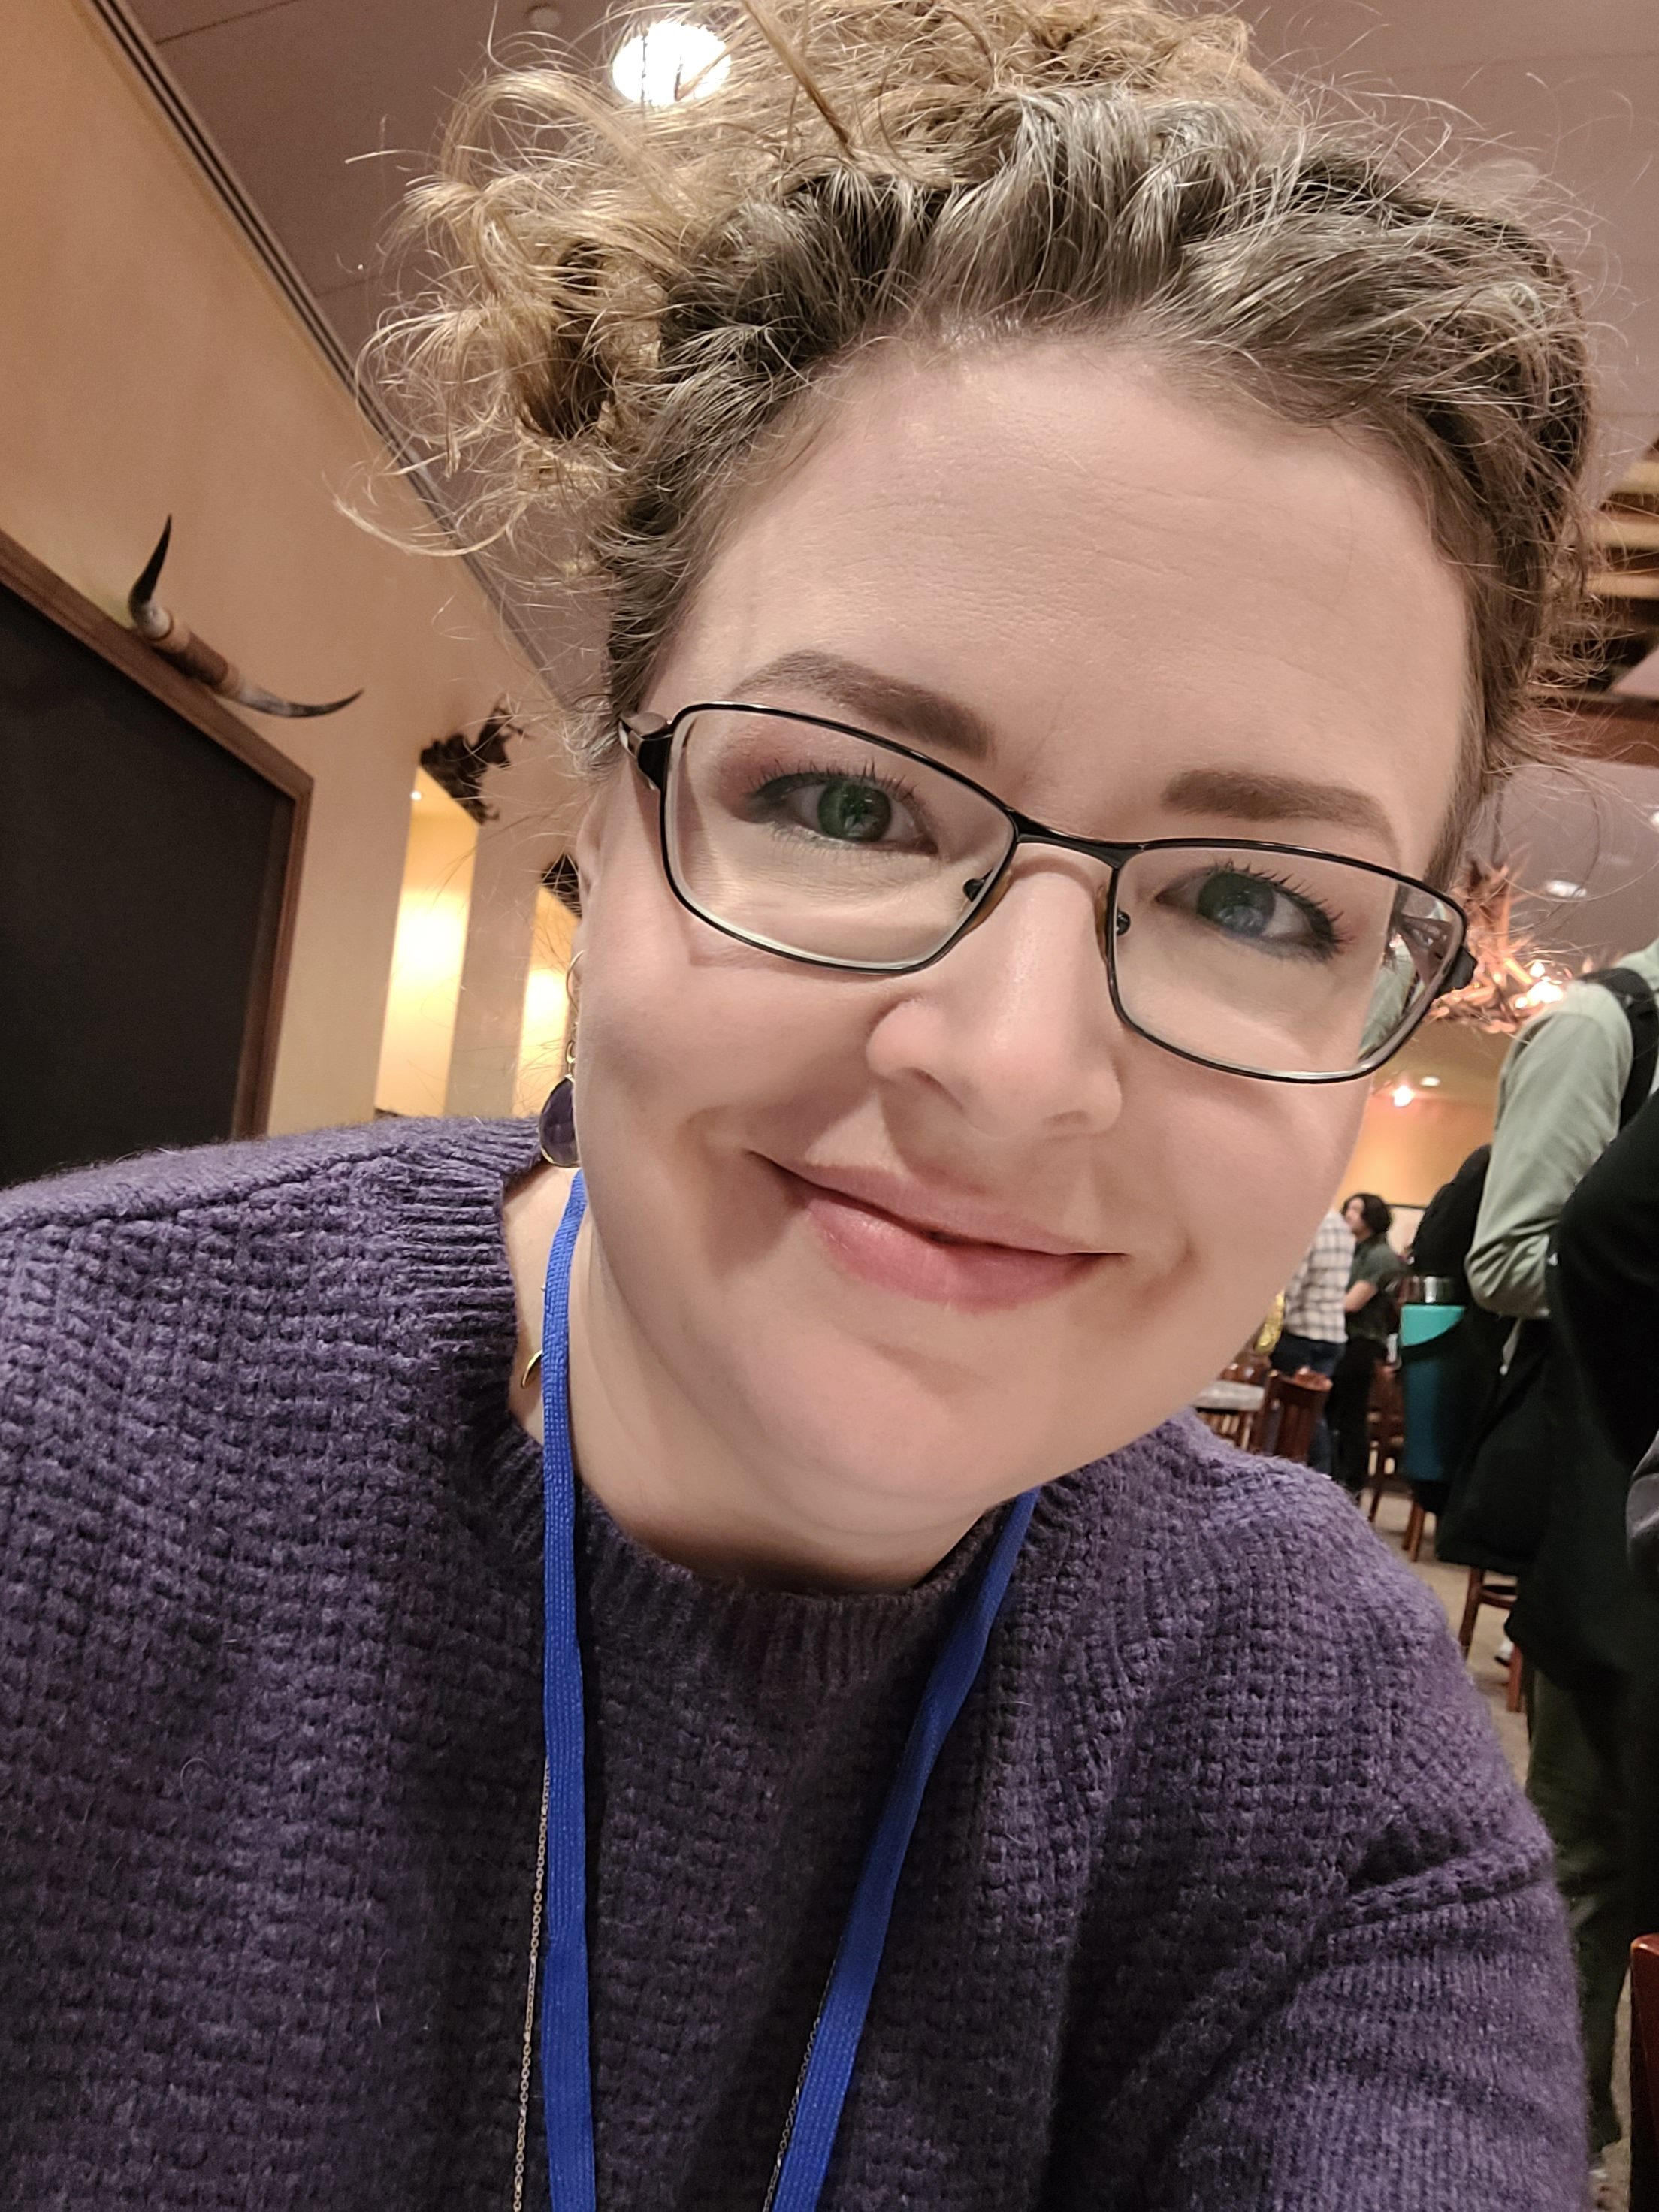 Beth VanOrden, wearing glasses and a purple sweater, smiles at the camera in this selfie-style photograph.